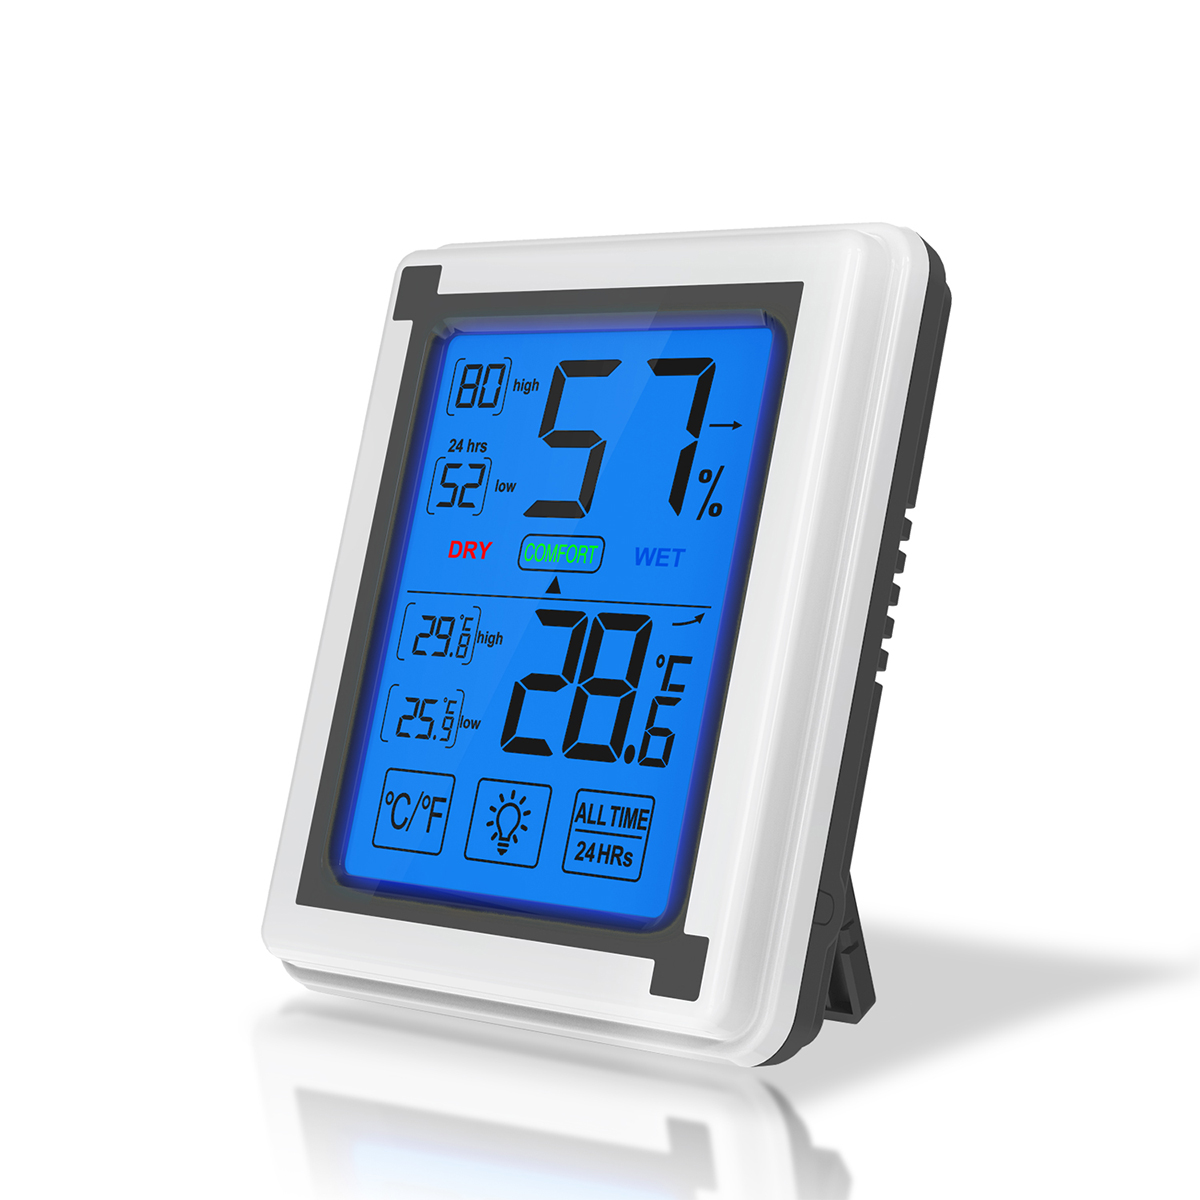 

New Large-screen LCD Touch Digital Thermometer And Hygrometer Backlight Comfort Temperature And Humidity Monitor